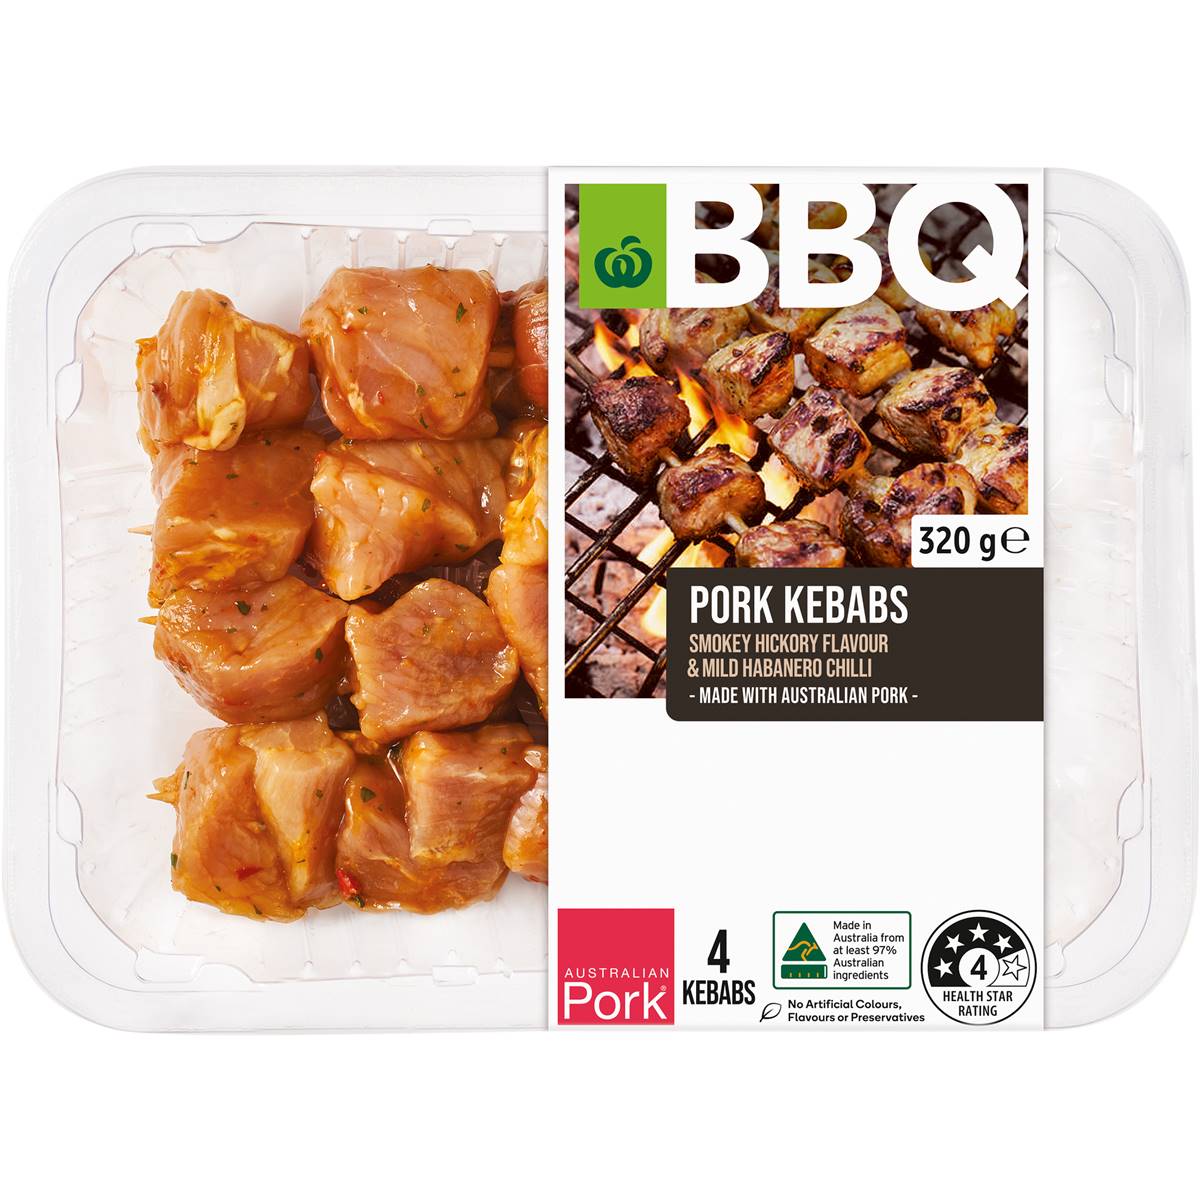 Calories in Woolworths Bbq Pork Kebabs Smokey Hickory & Mild Habanero Chilli